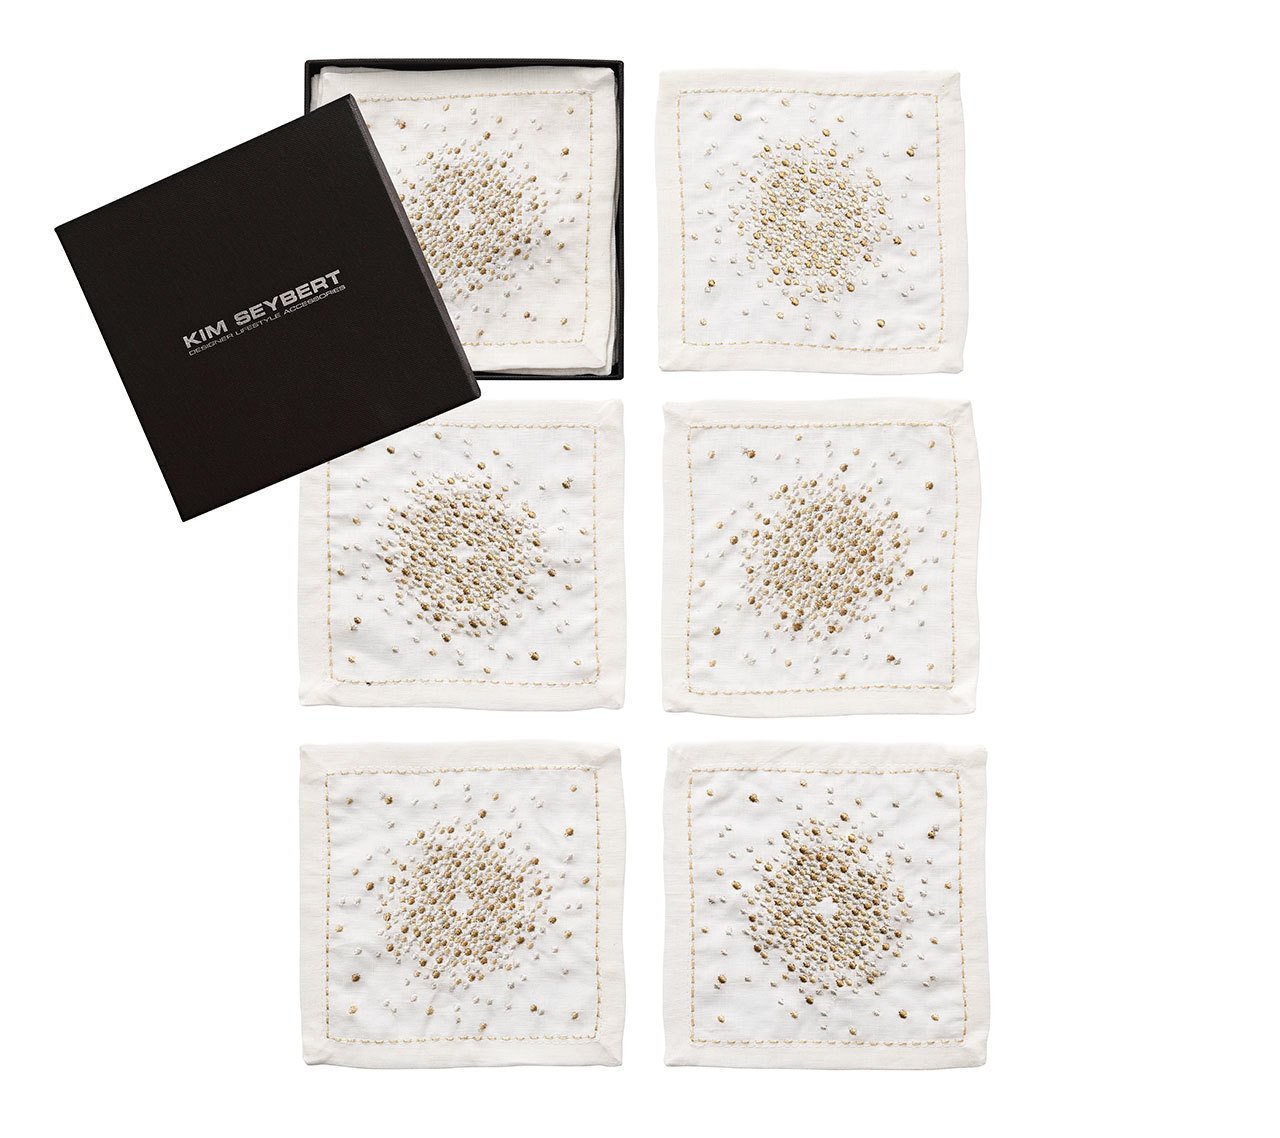 Starburst Cocktail Napkins in White, Gold & Silver, Set of 6 in a Gift Box by Kim Seybert